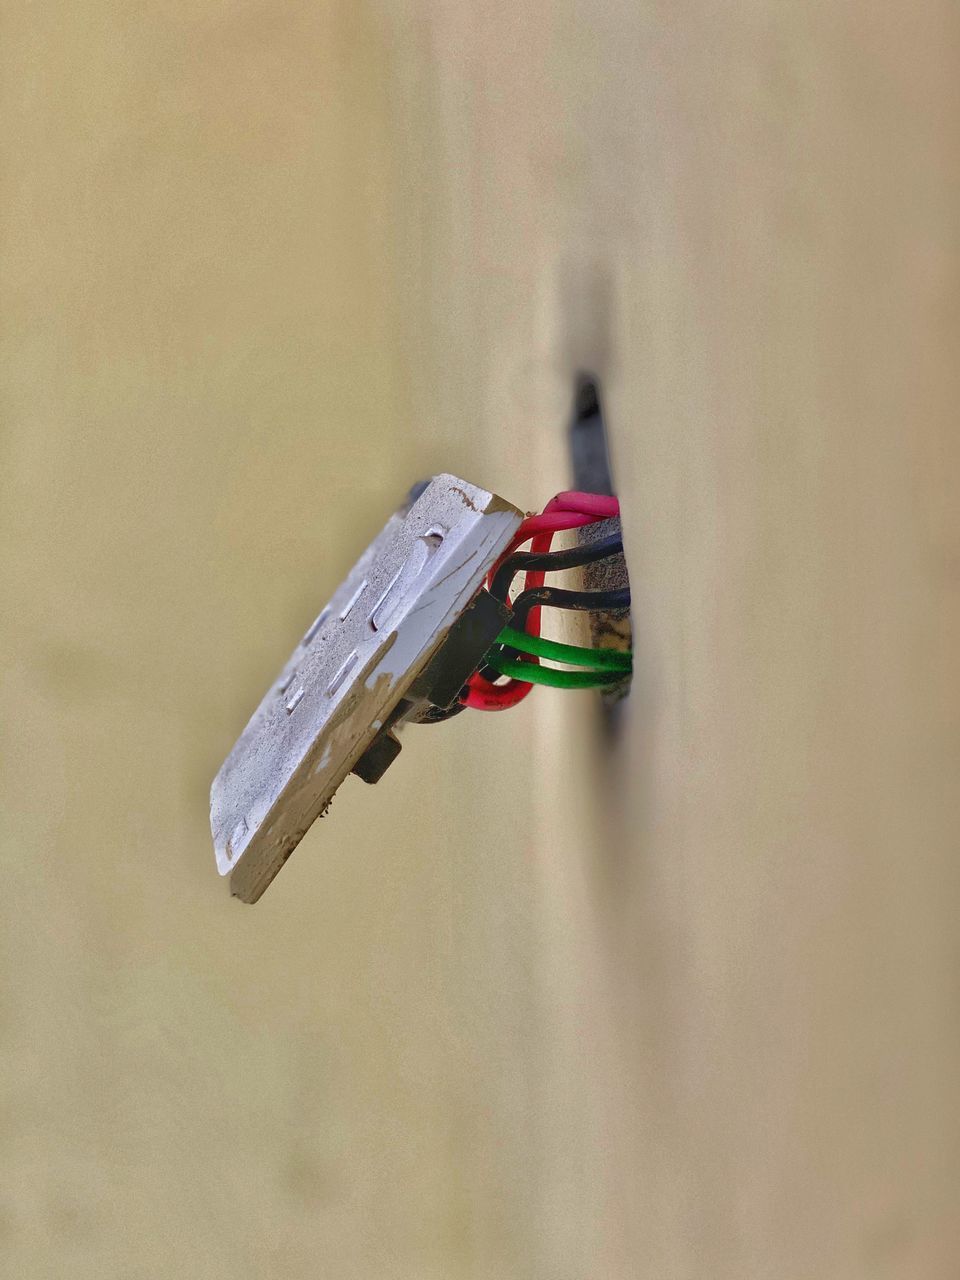 CLOSE-UP OF CLOTHESPINS ON WALL